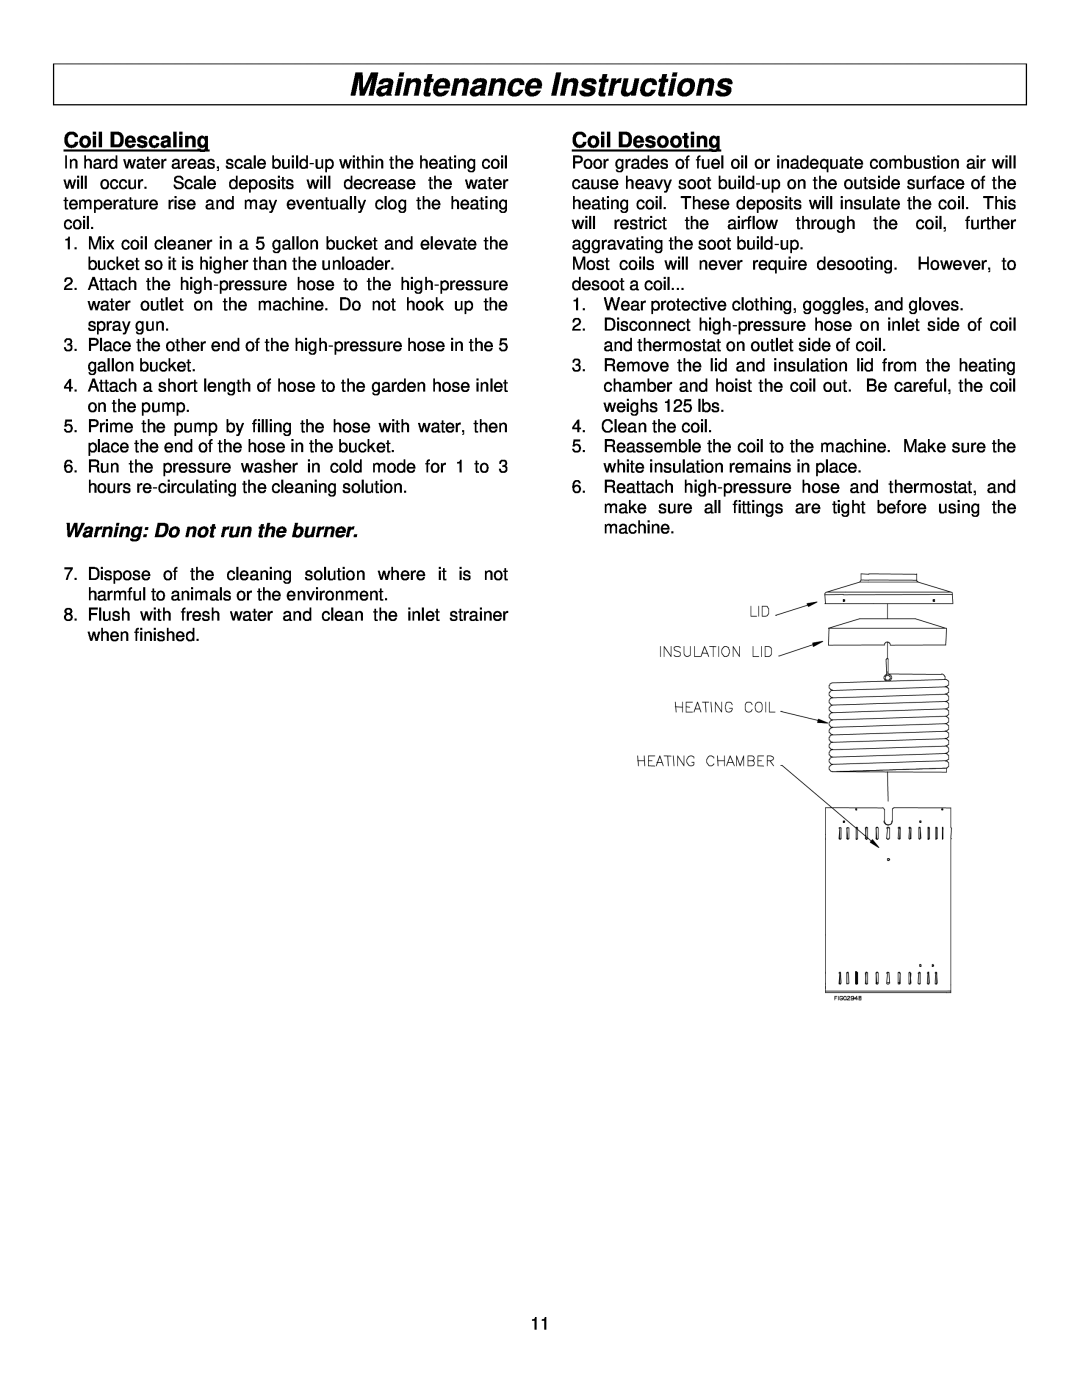 Panasonic M157594J specifications Coil Descaling, Coil Desooting, Maintenance Instructions, Warning Do not run the burner 